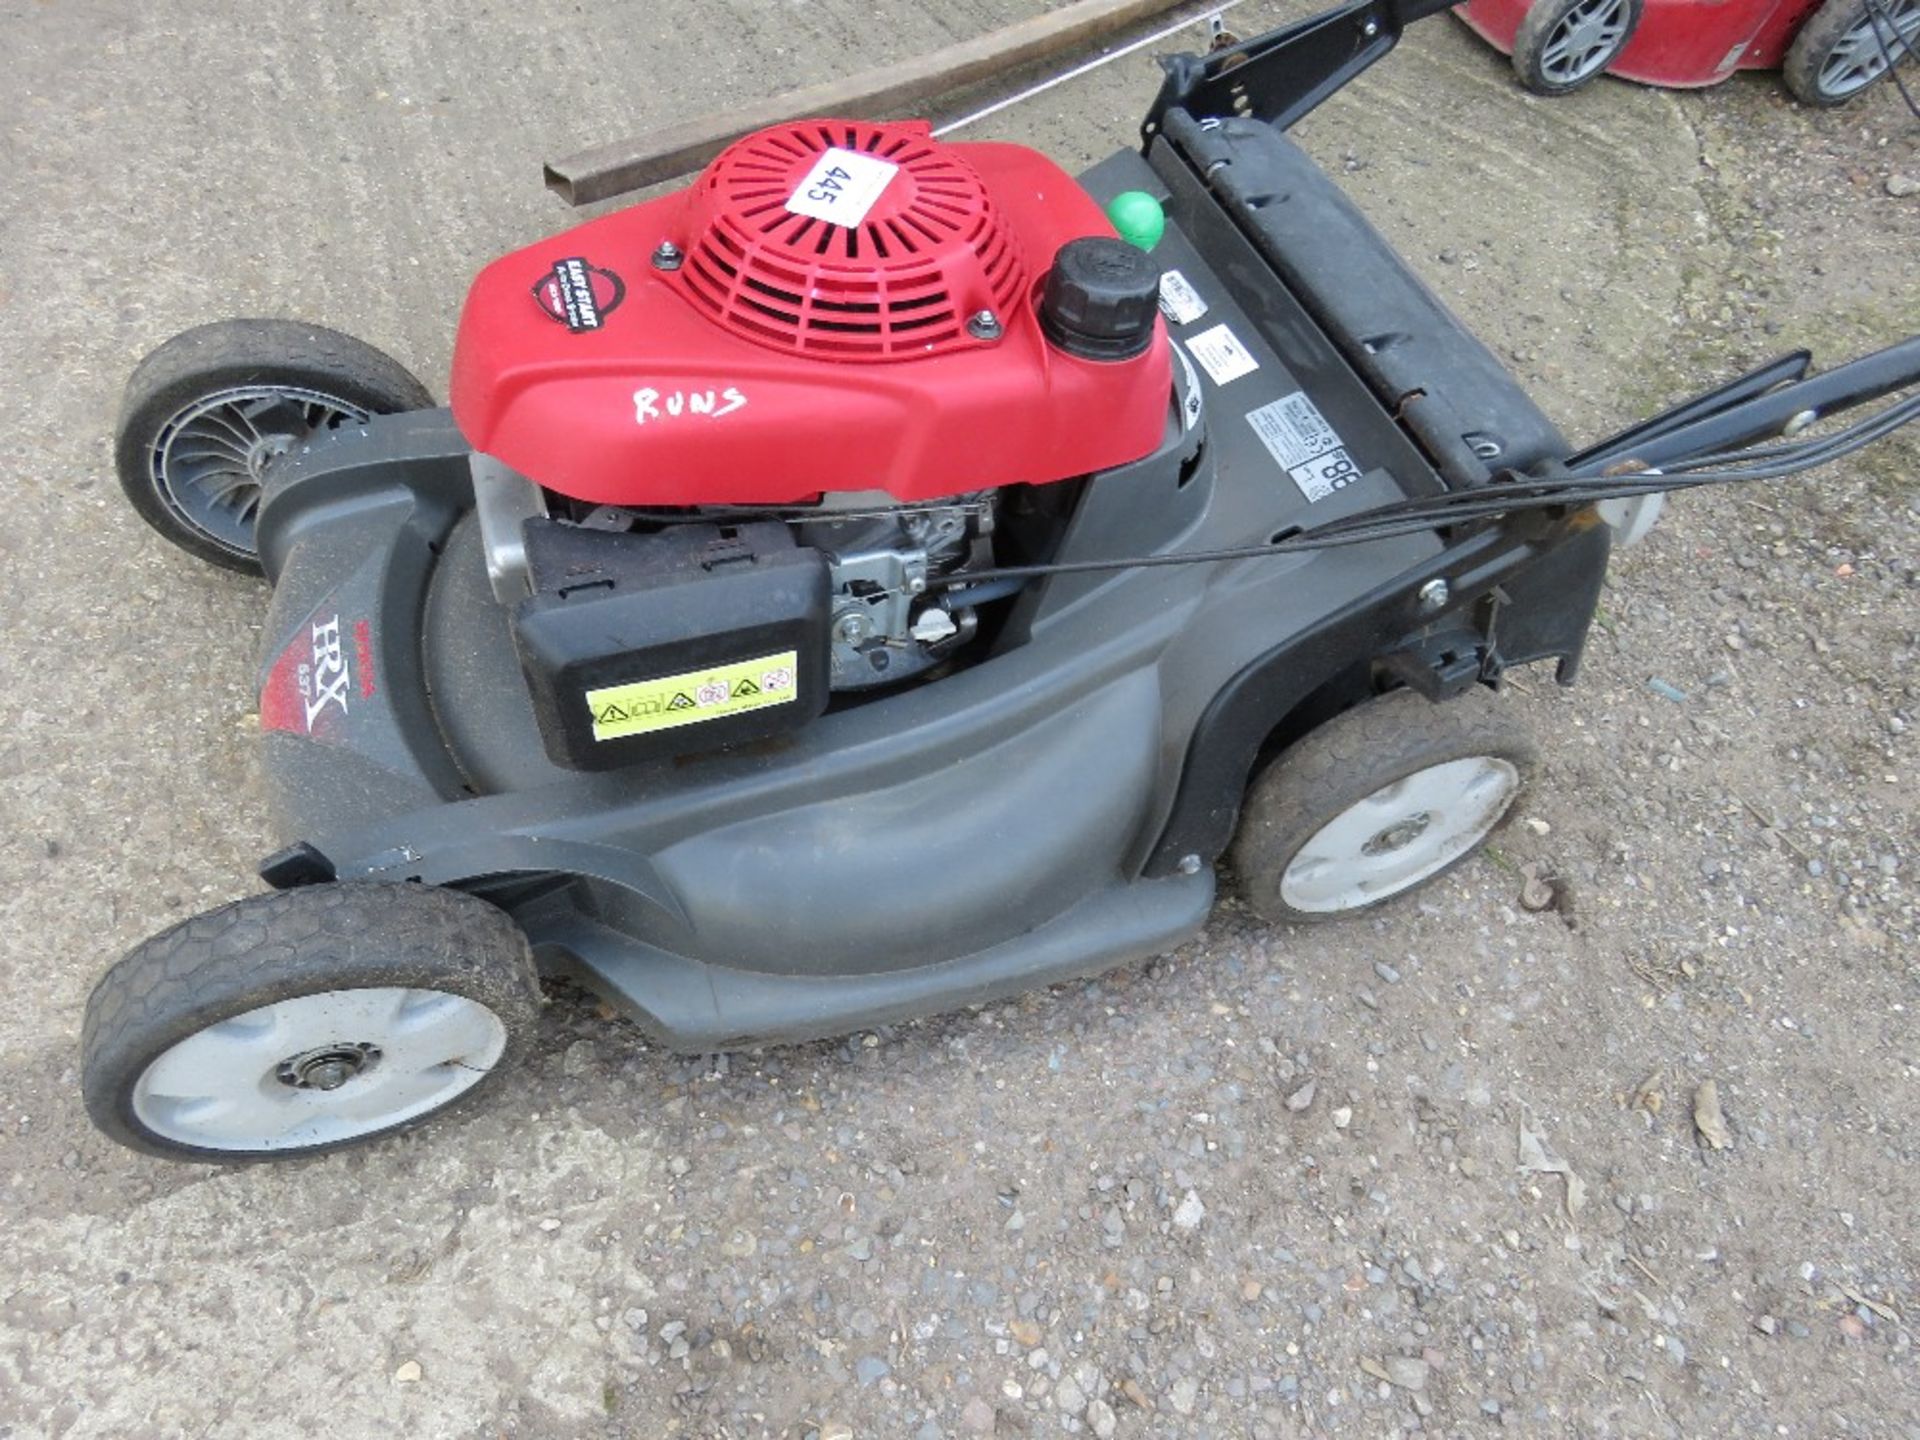 HONDA HRX537 PETROL ENGINED MOWER WITH NO COLLECTOR. ....THIS LOT IS SOLD UNDER THE AUCTIONEERS MAR - Image 2 of 4